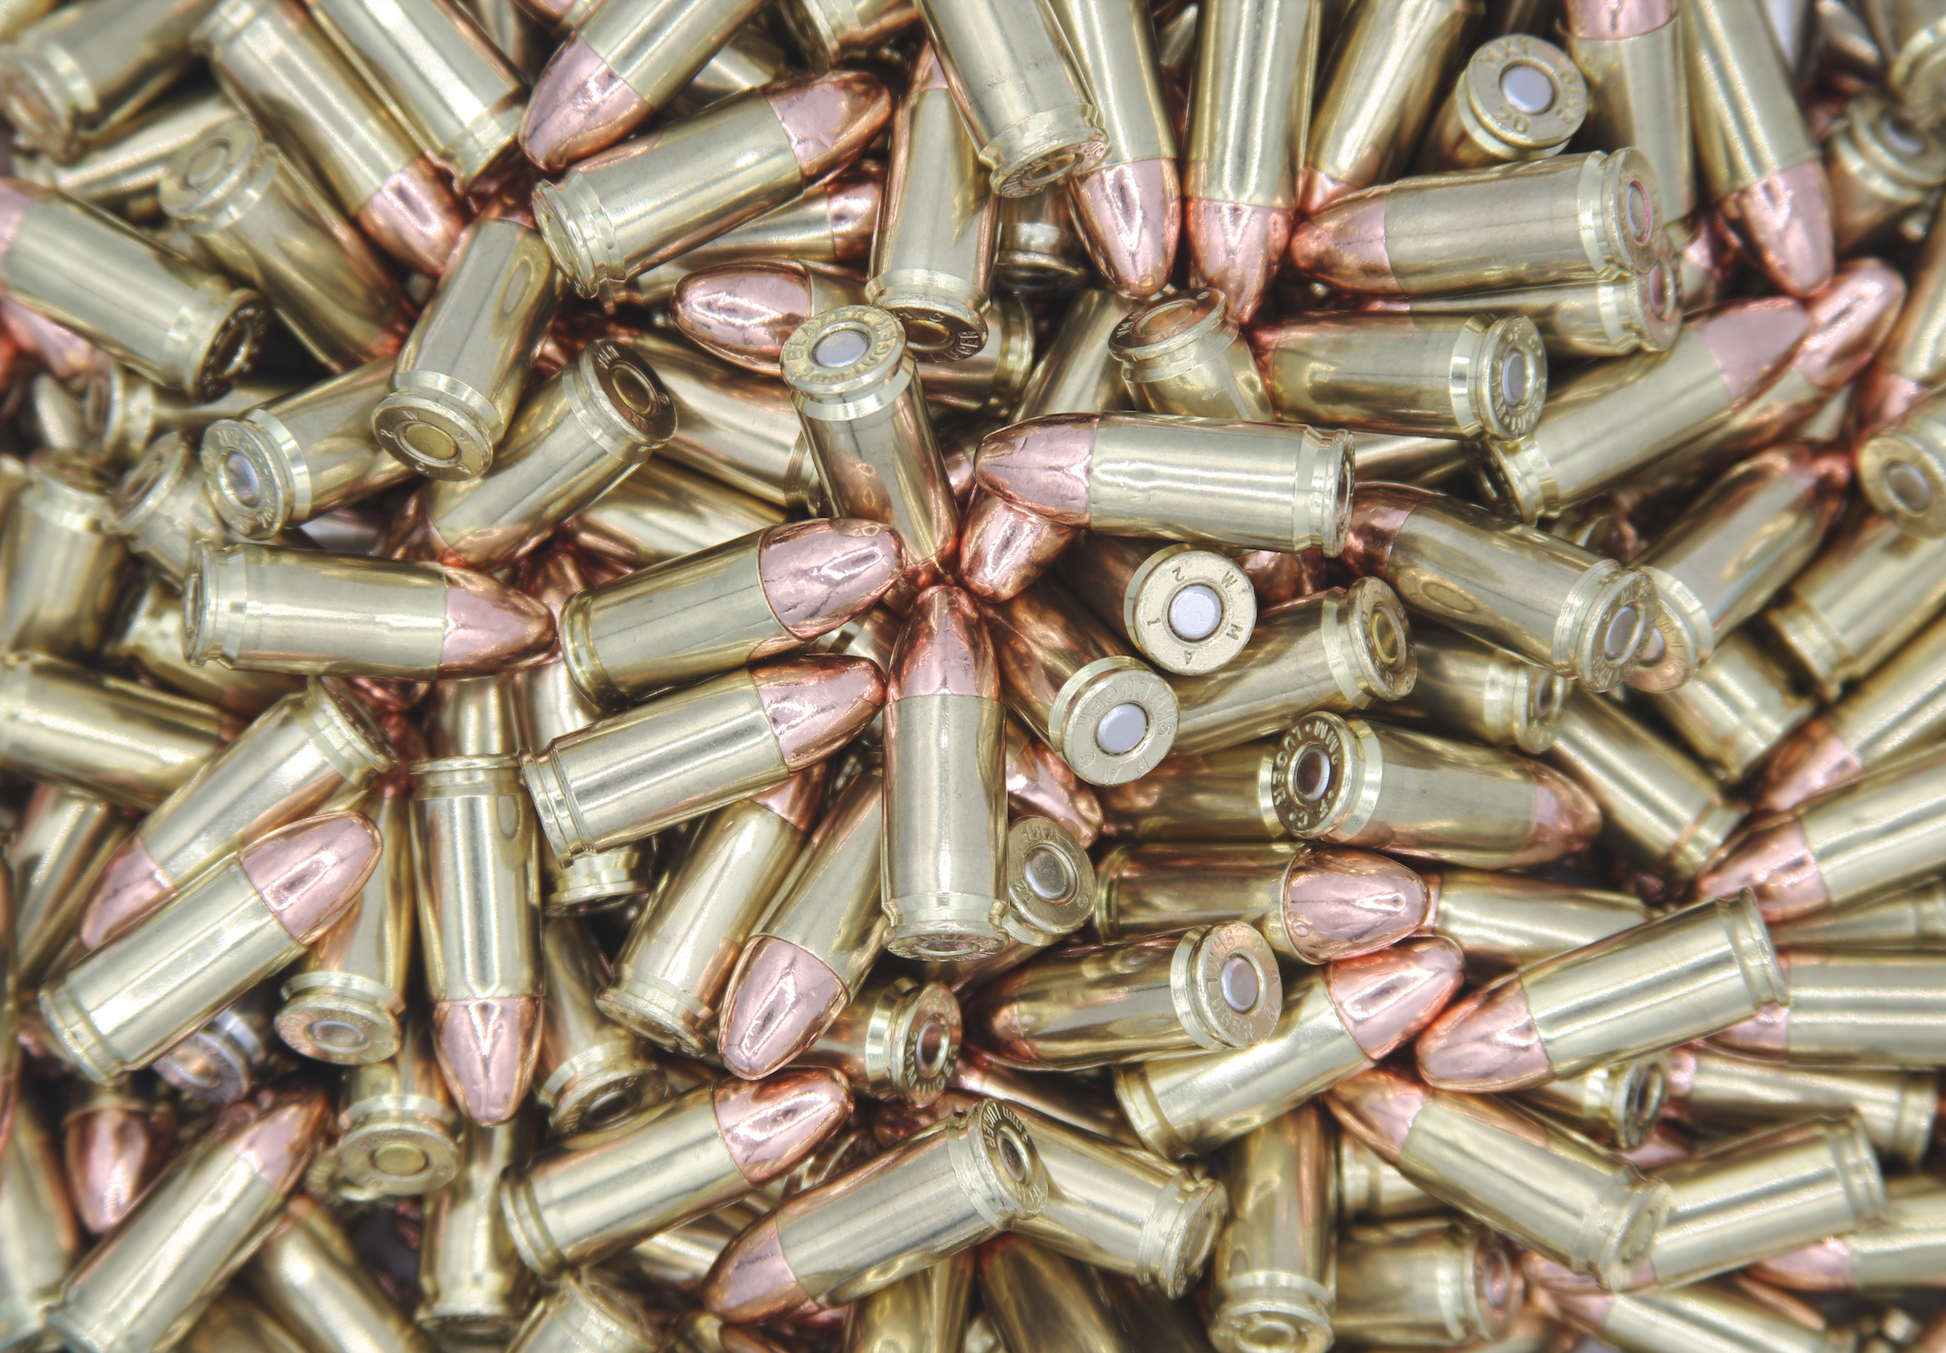 9mm Luger (9x19) Brass casings with 115gr, Round Nose bullet